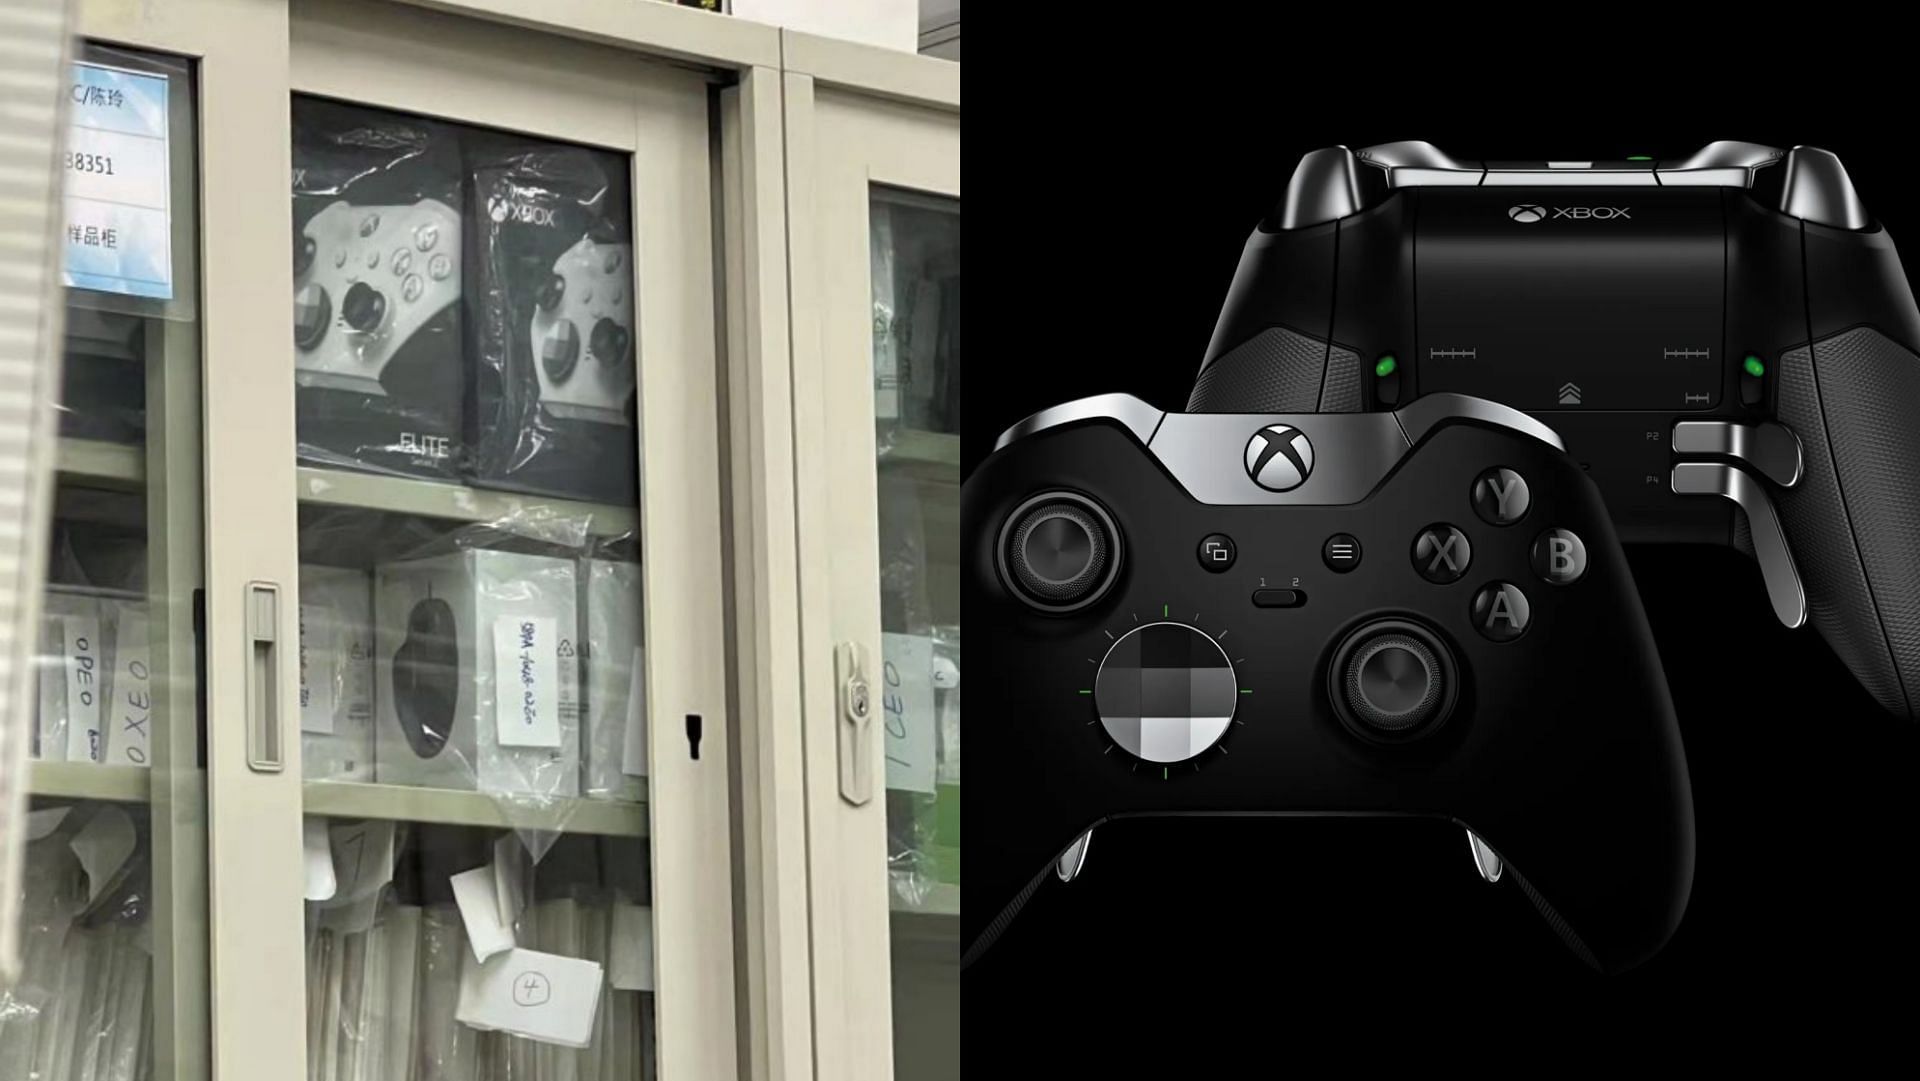 According to recent leaks and rumors, a white Xbox Elite Series 2 controller could be on the way (Image via IdleSloth/Twitter and Microsoft)